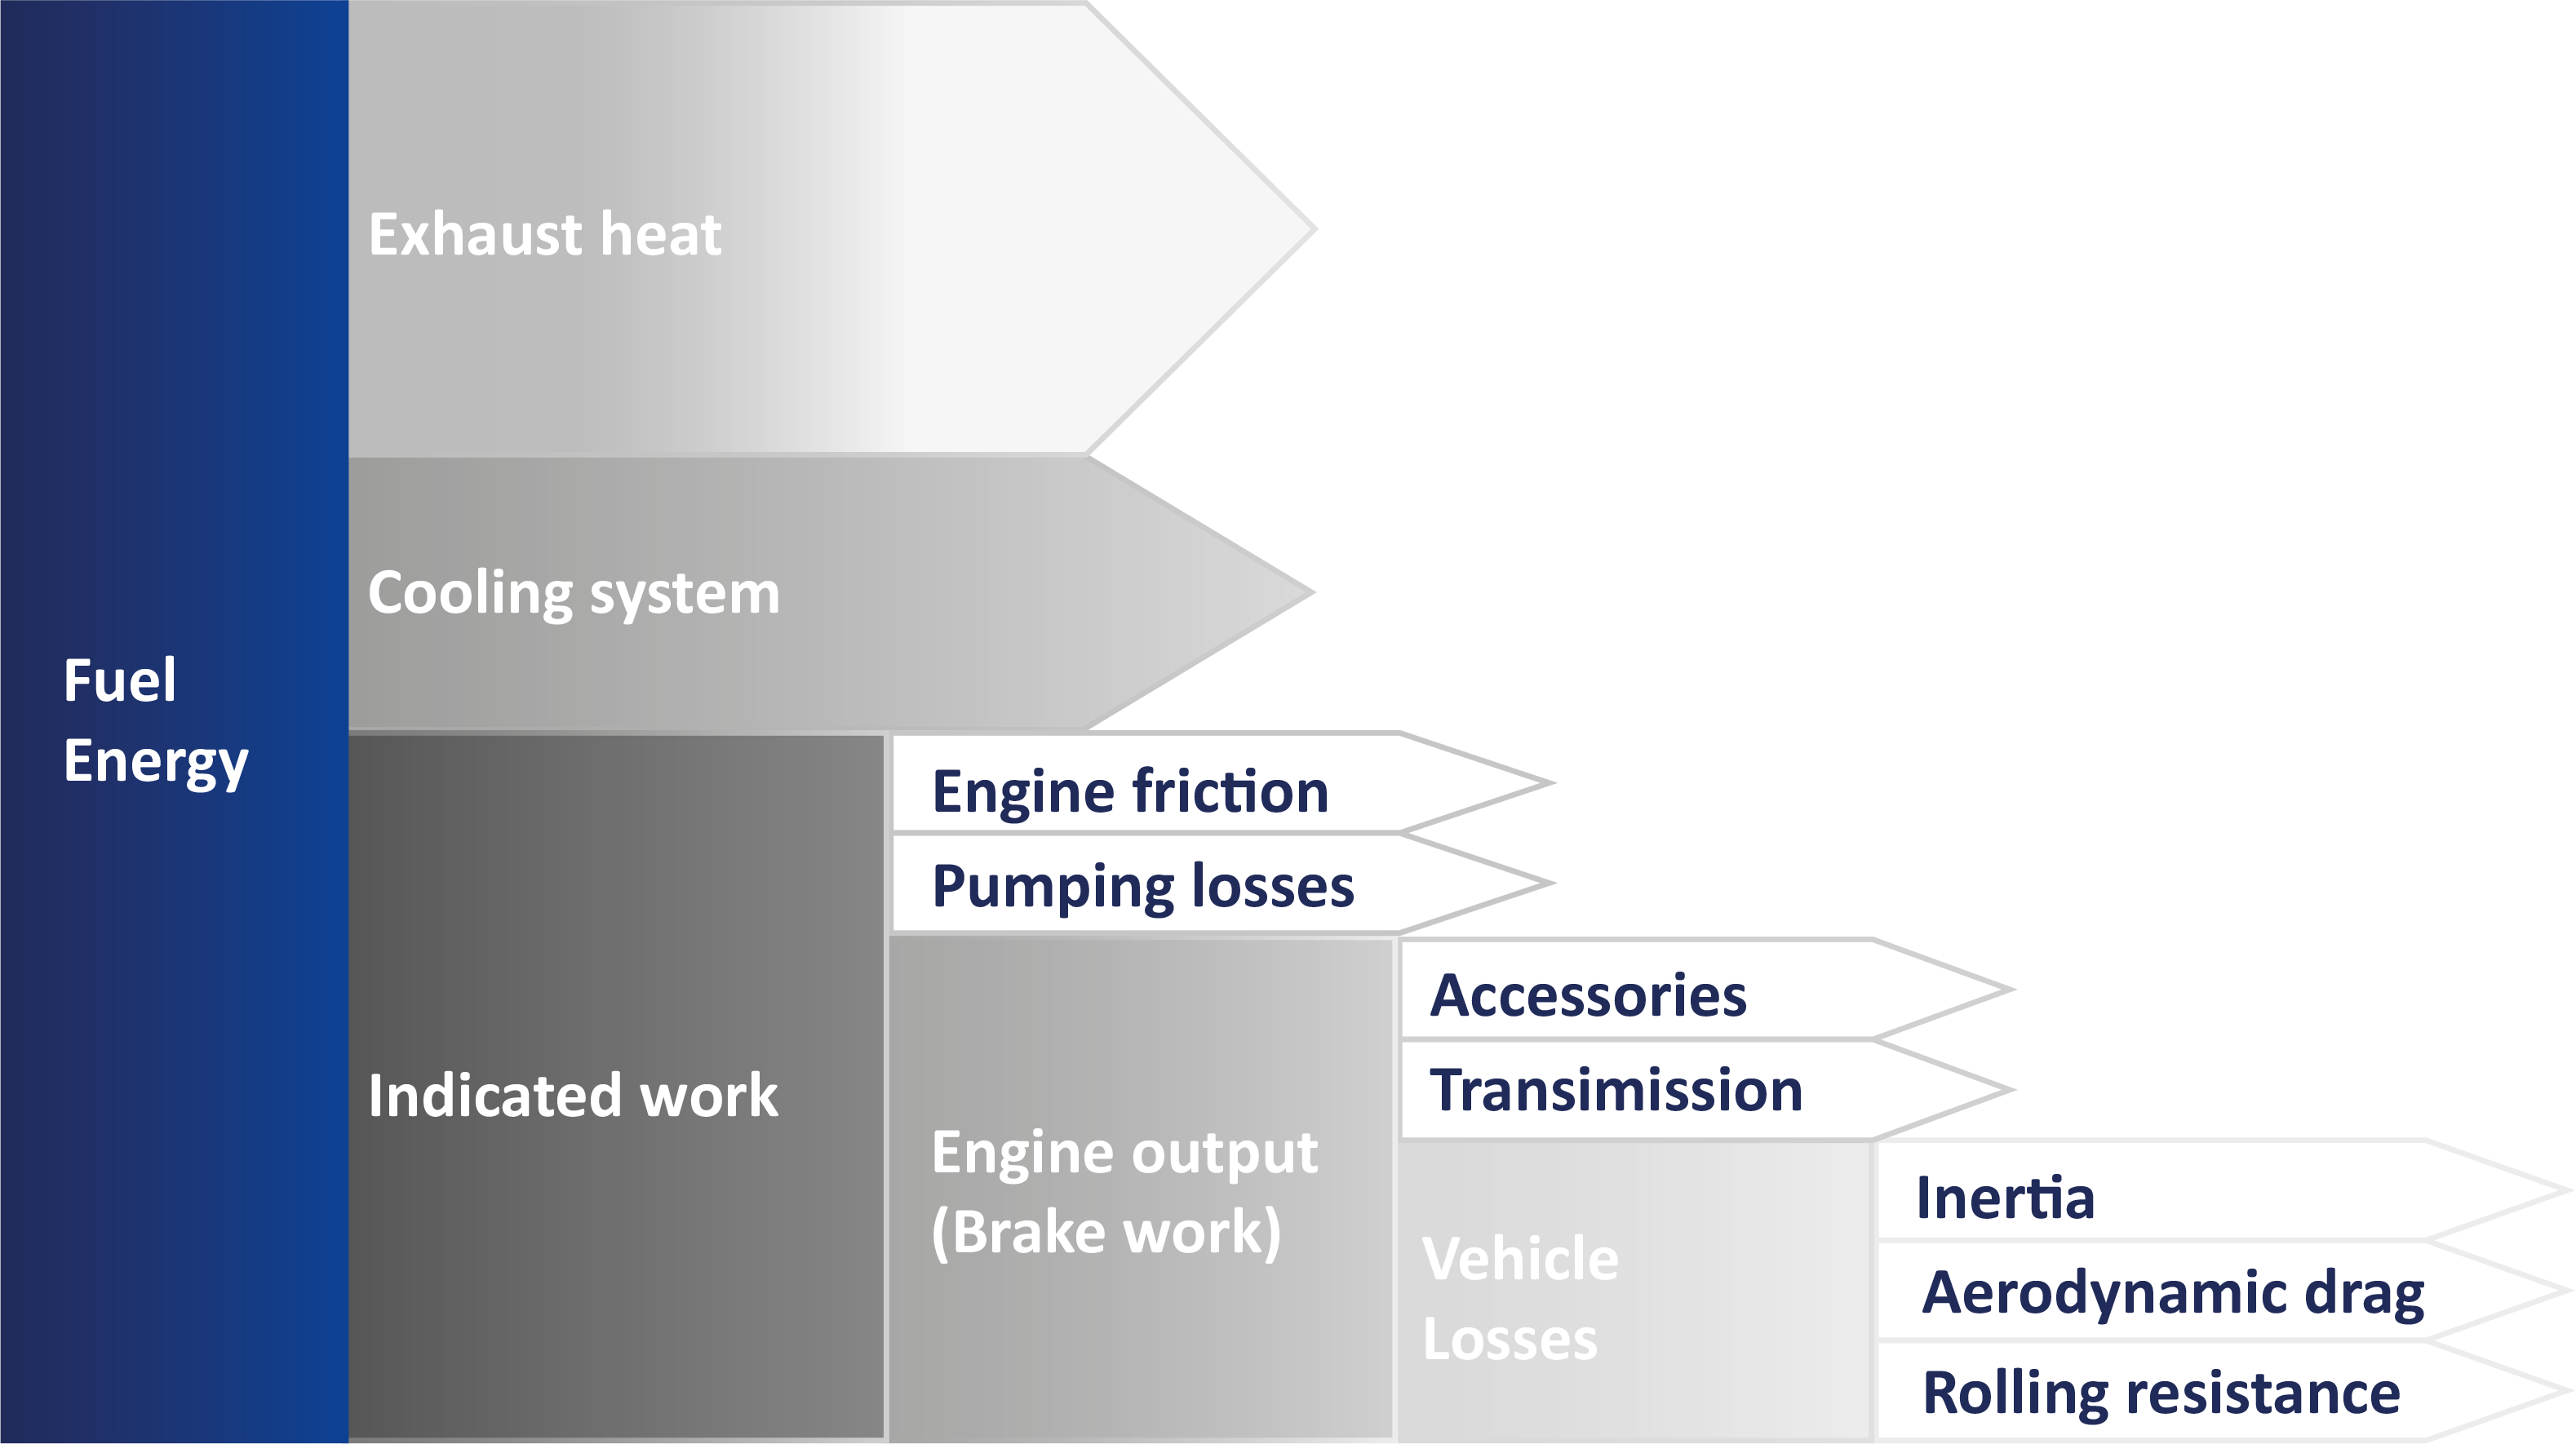 How does RR contribute to vehicle fuel consumption? What other factors contribute to fuel consumption?